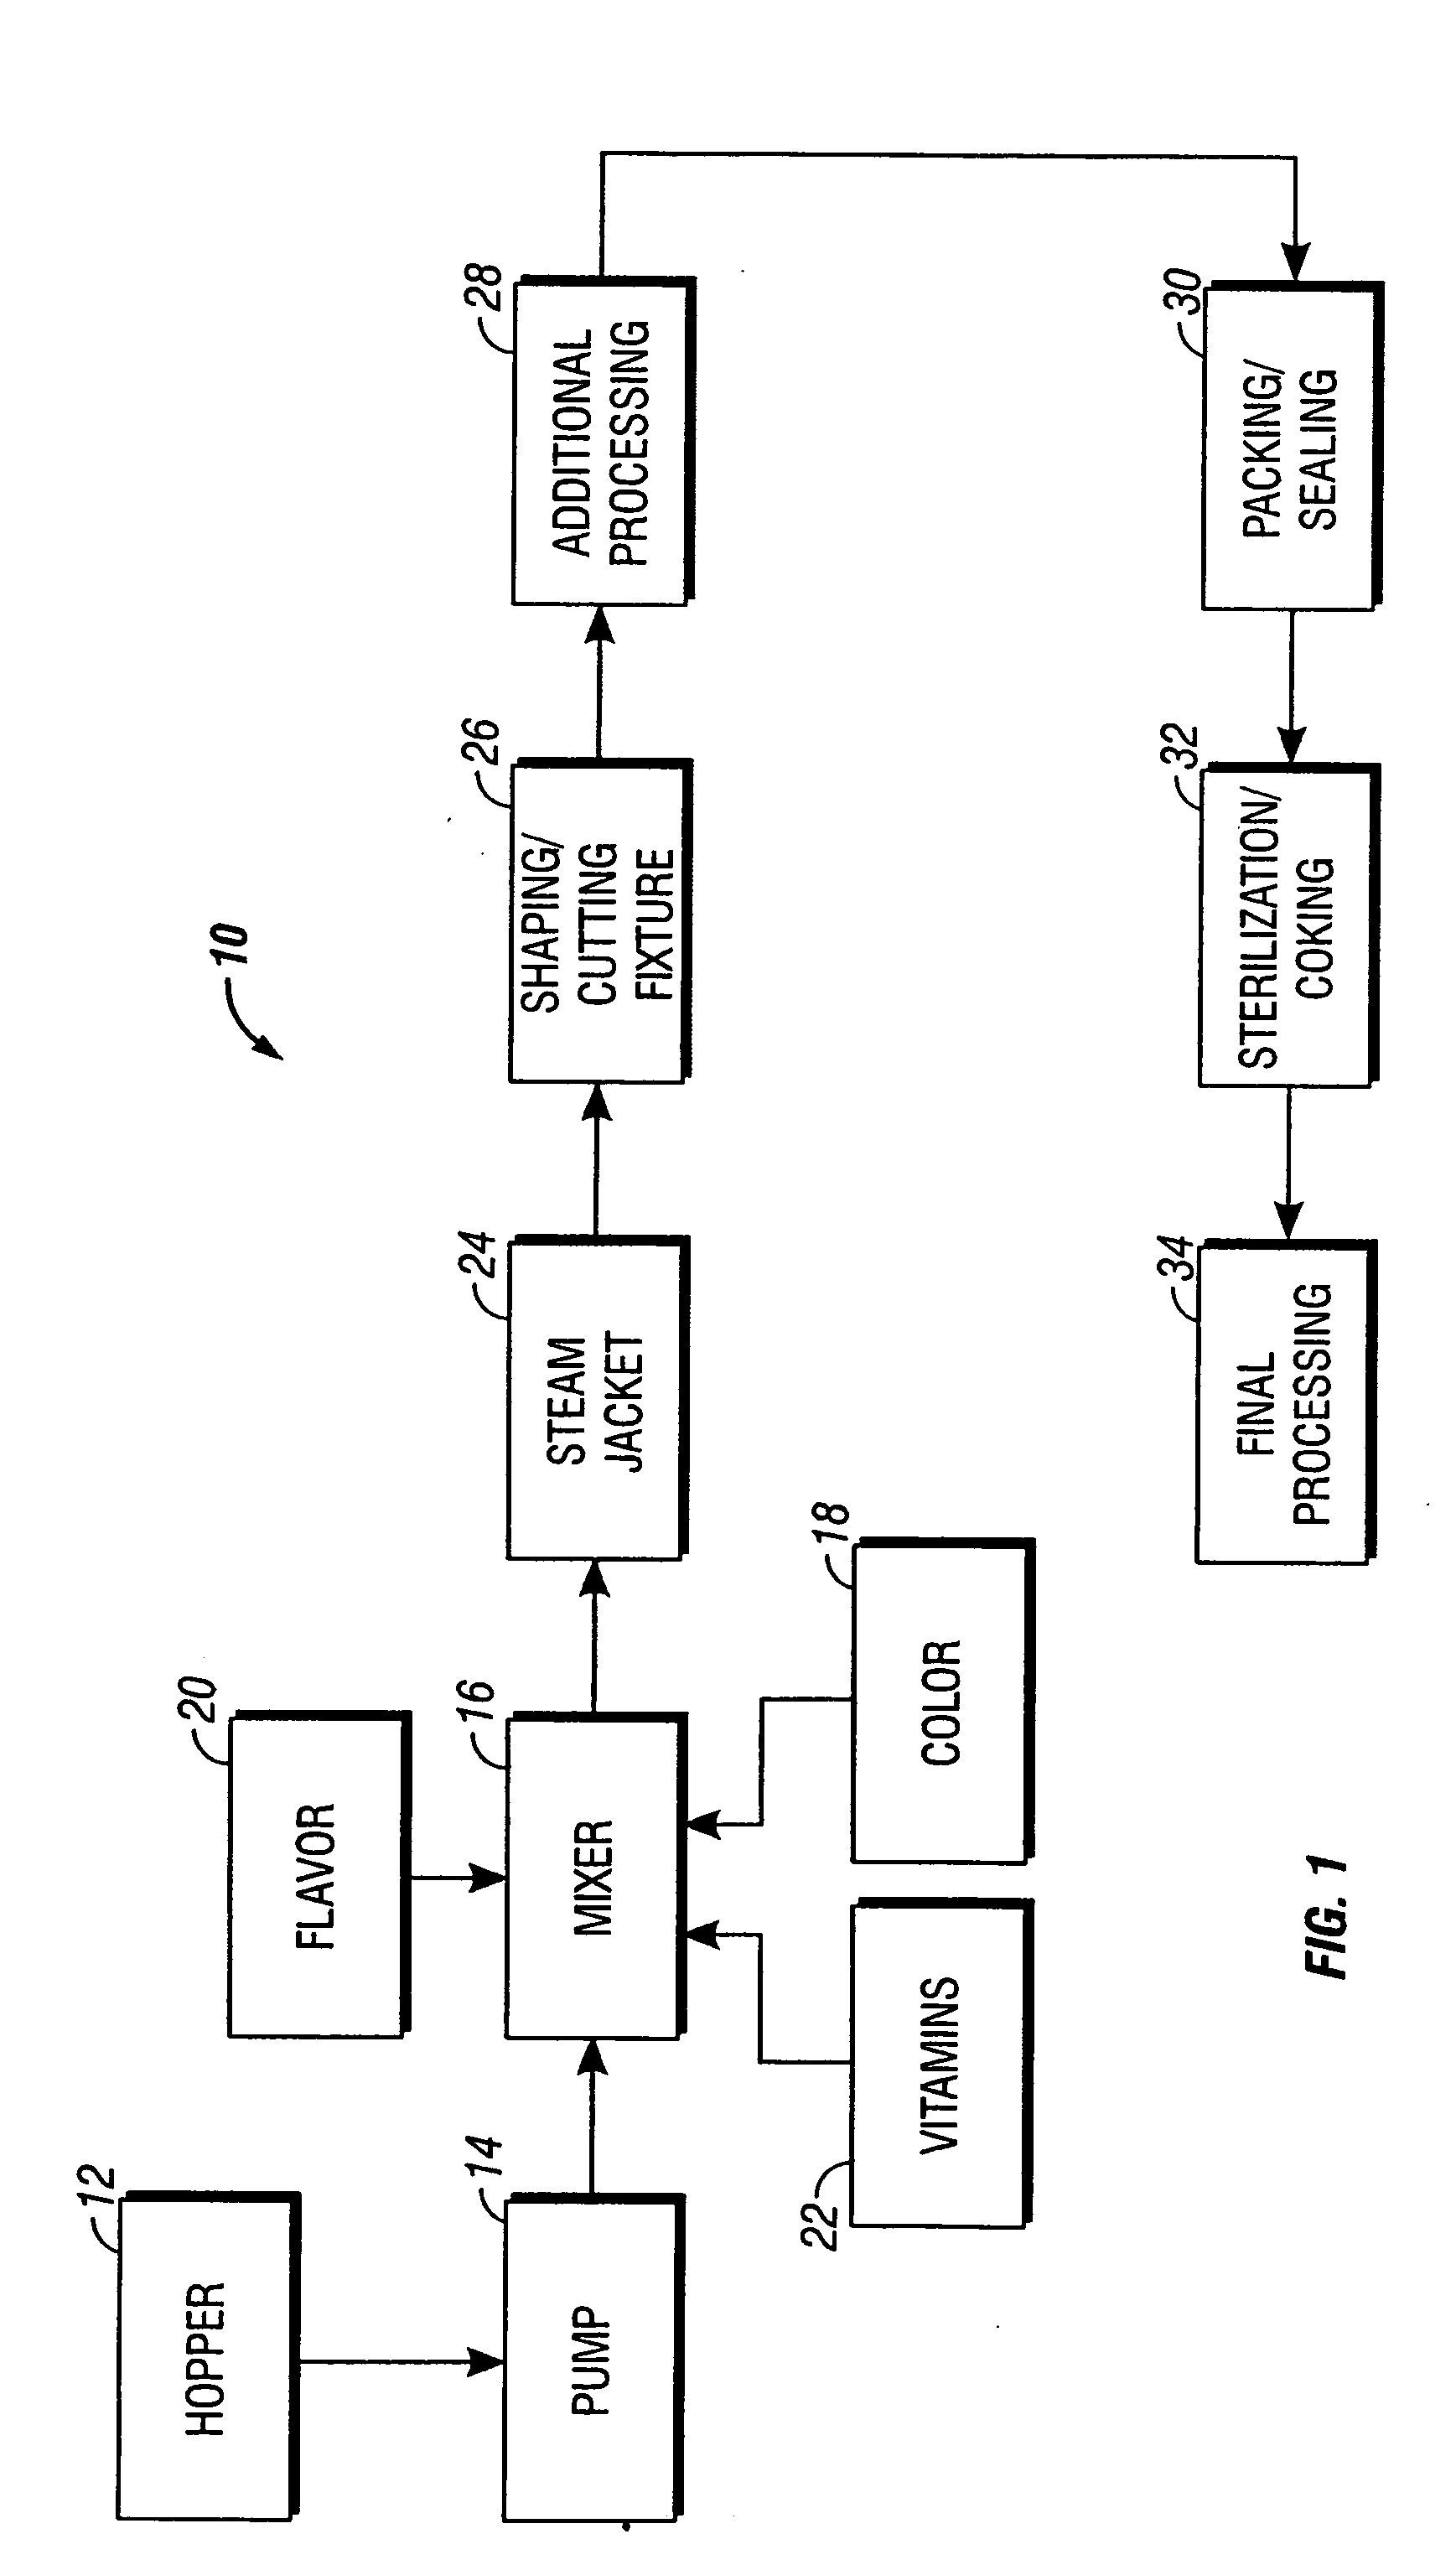 Method and apparatus for continuous processing of packaged products